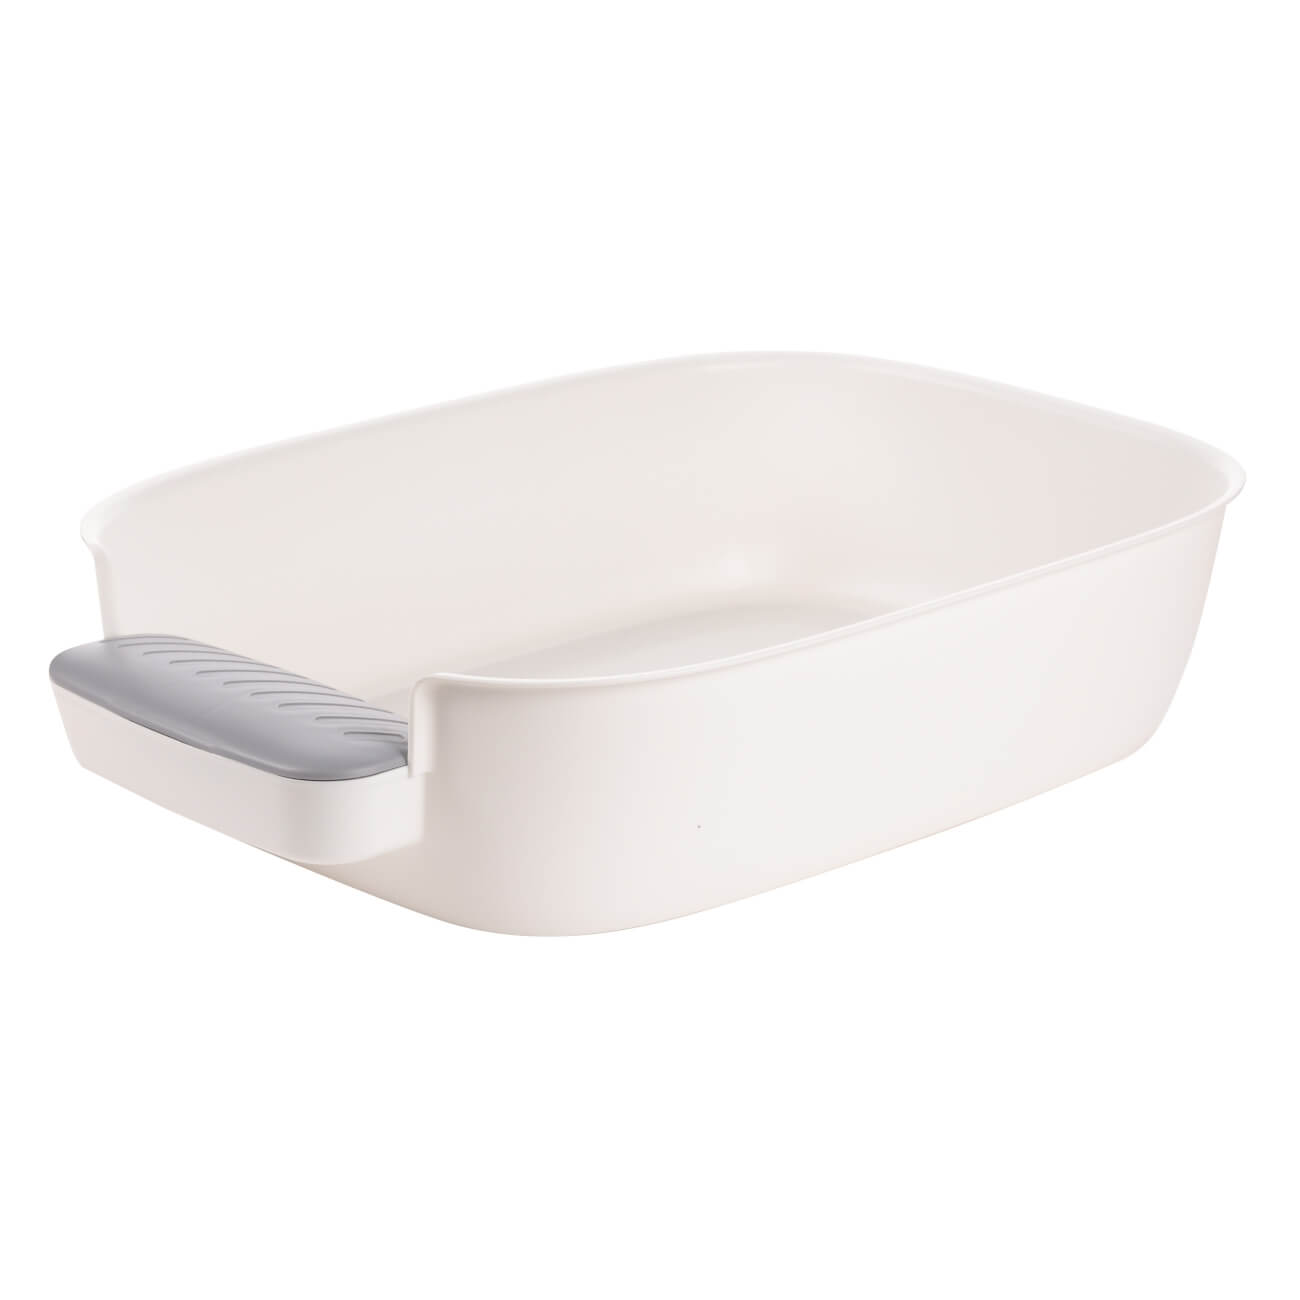 Toilet tray for cats, 52x36 cm, with bag compartment, plastic, white-gray, Pet изображение № 1